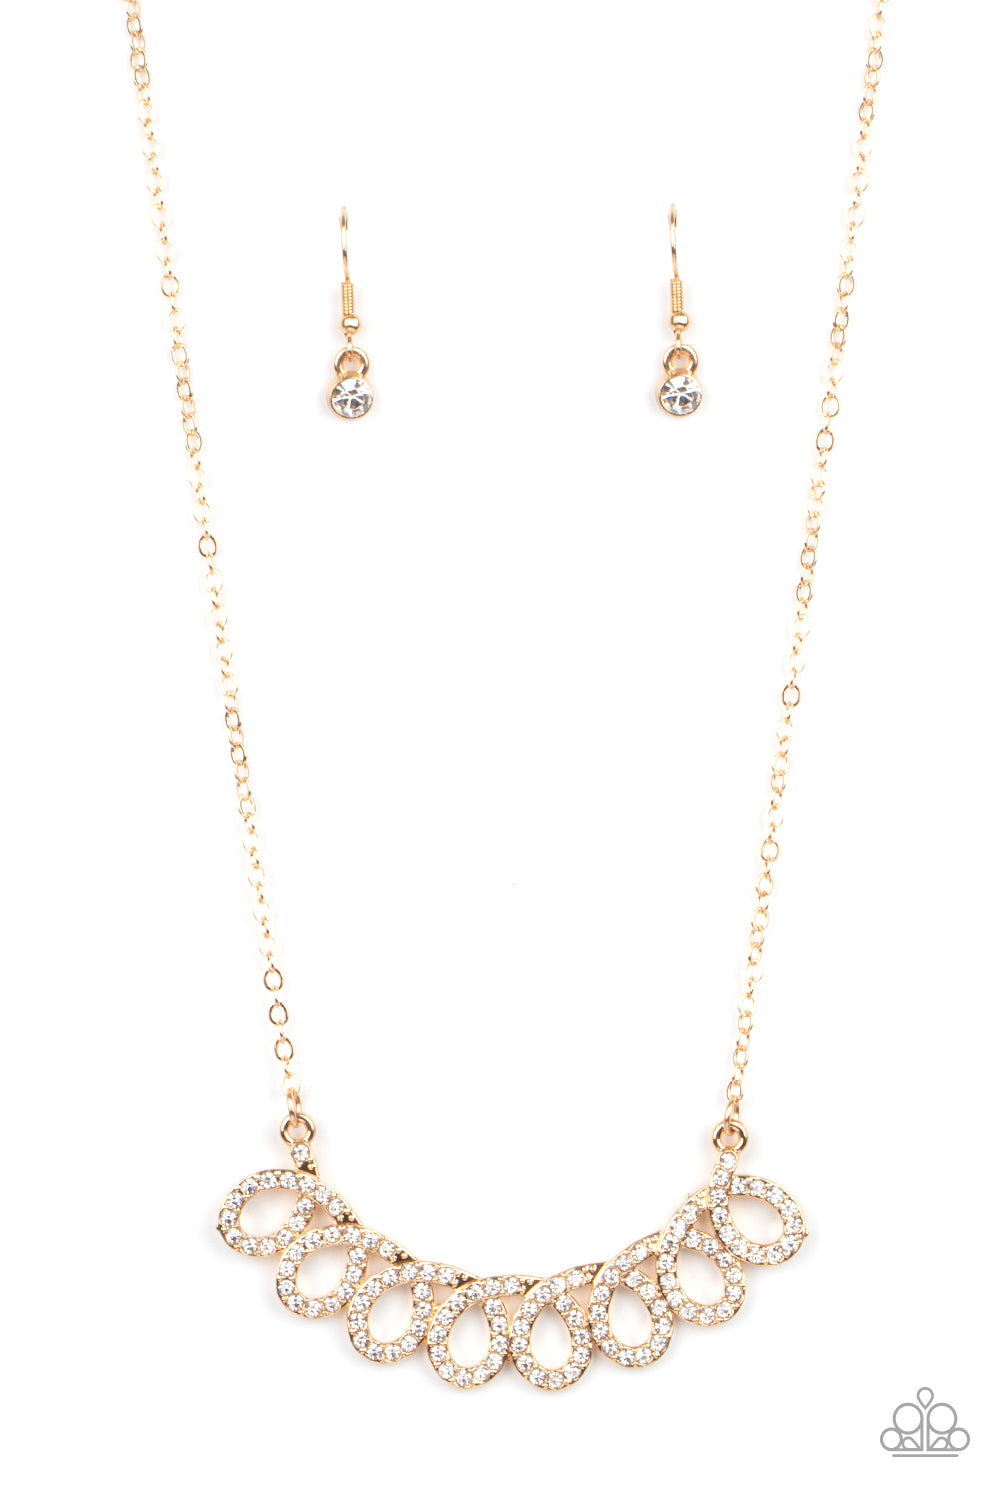 Timeless Trimmings Gold Necklace - Paparazzi Accessories  A white rhinestone encrusted gold ribbon delicately loops below the collar, coalescing into a timelessly stationary statement piece. Features an adjustable clasp closure.  ﻿All Paparazzi Accessories are lead free and nickel free!  Sold as one individual necklace. Includes one pair of matching earrings.